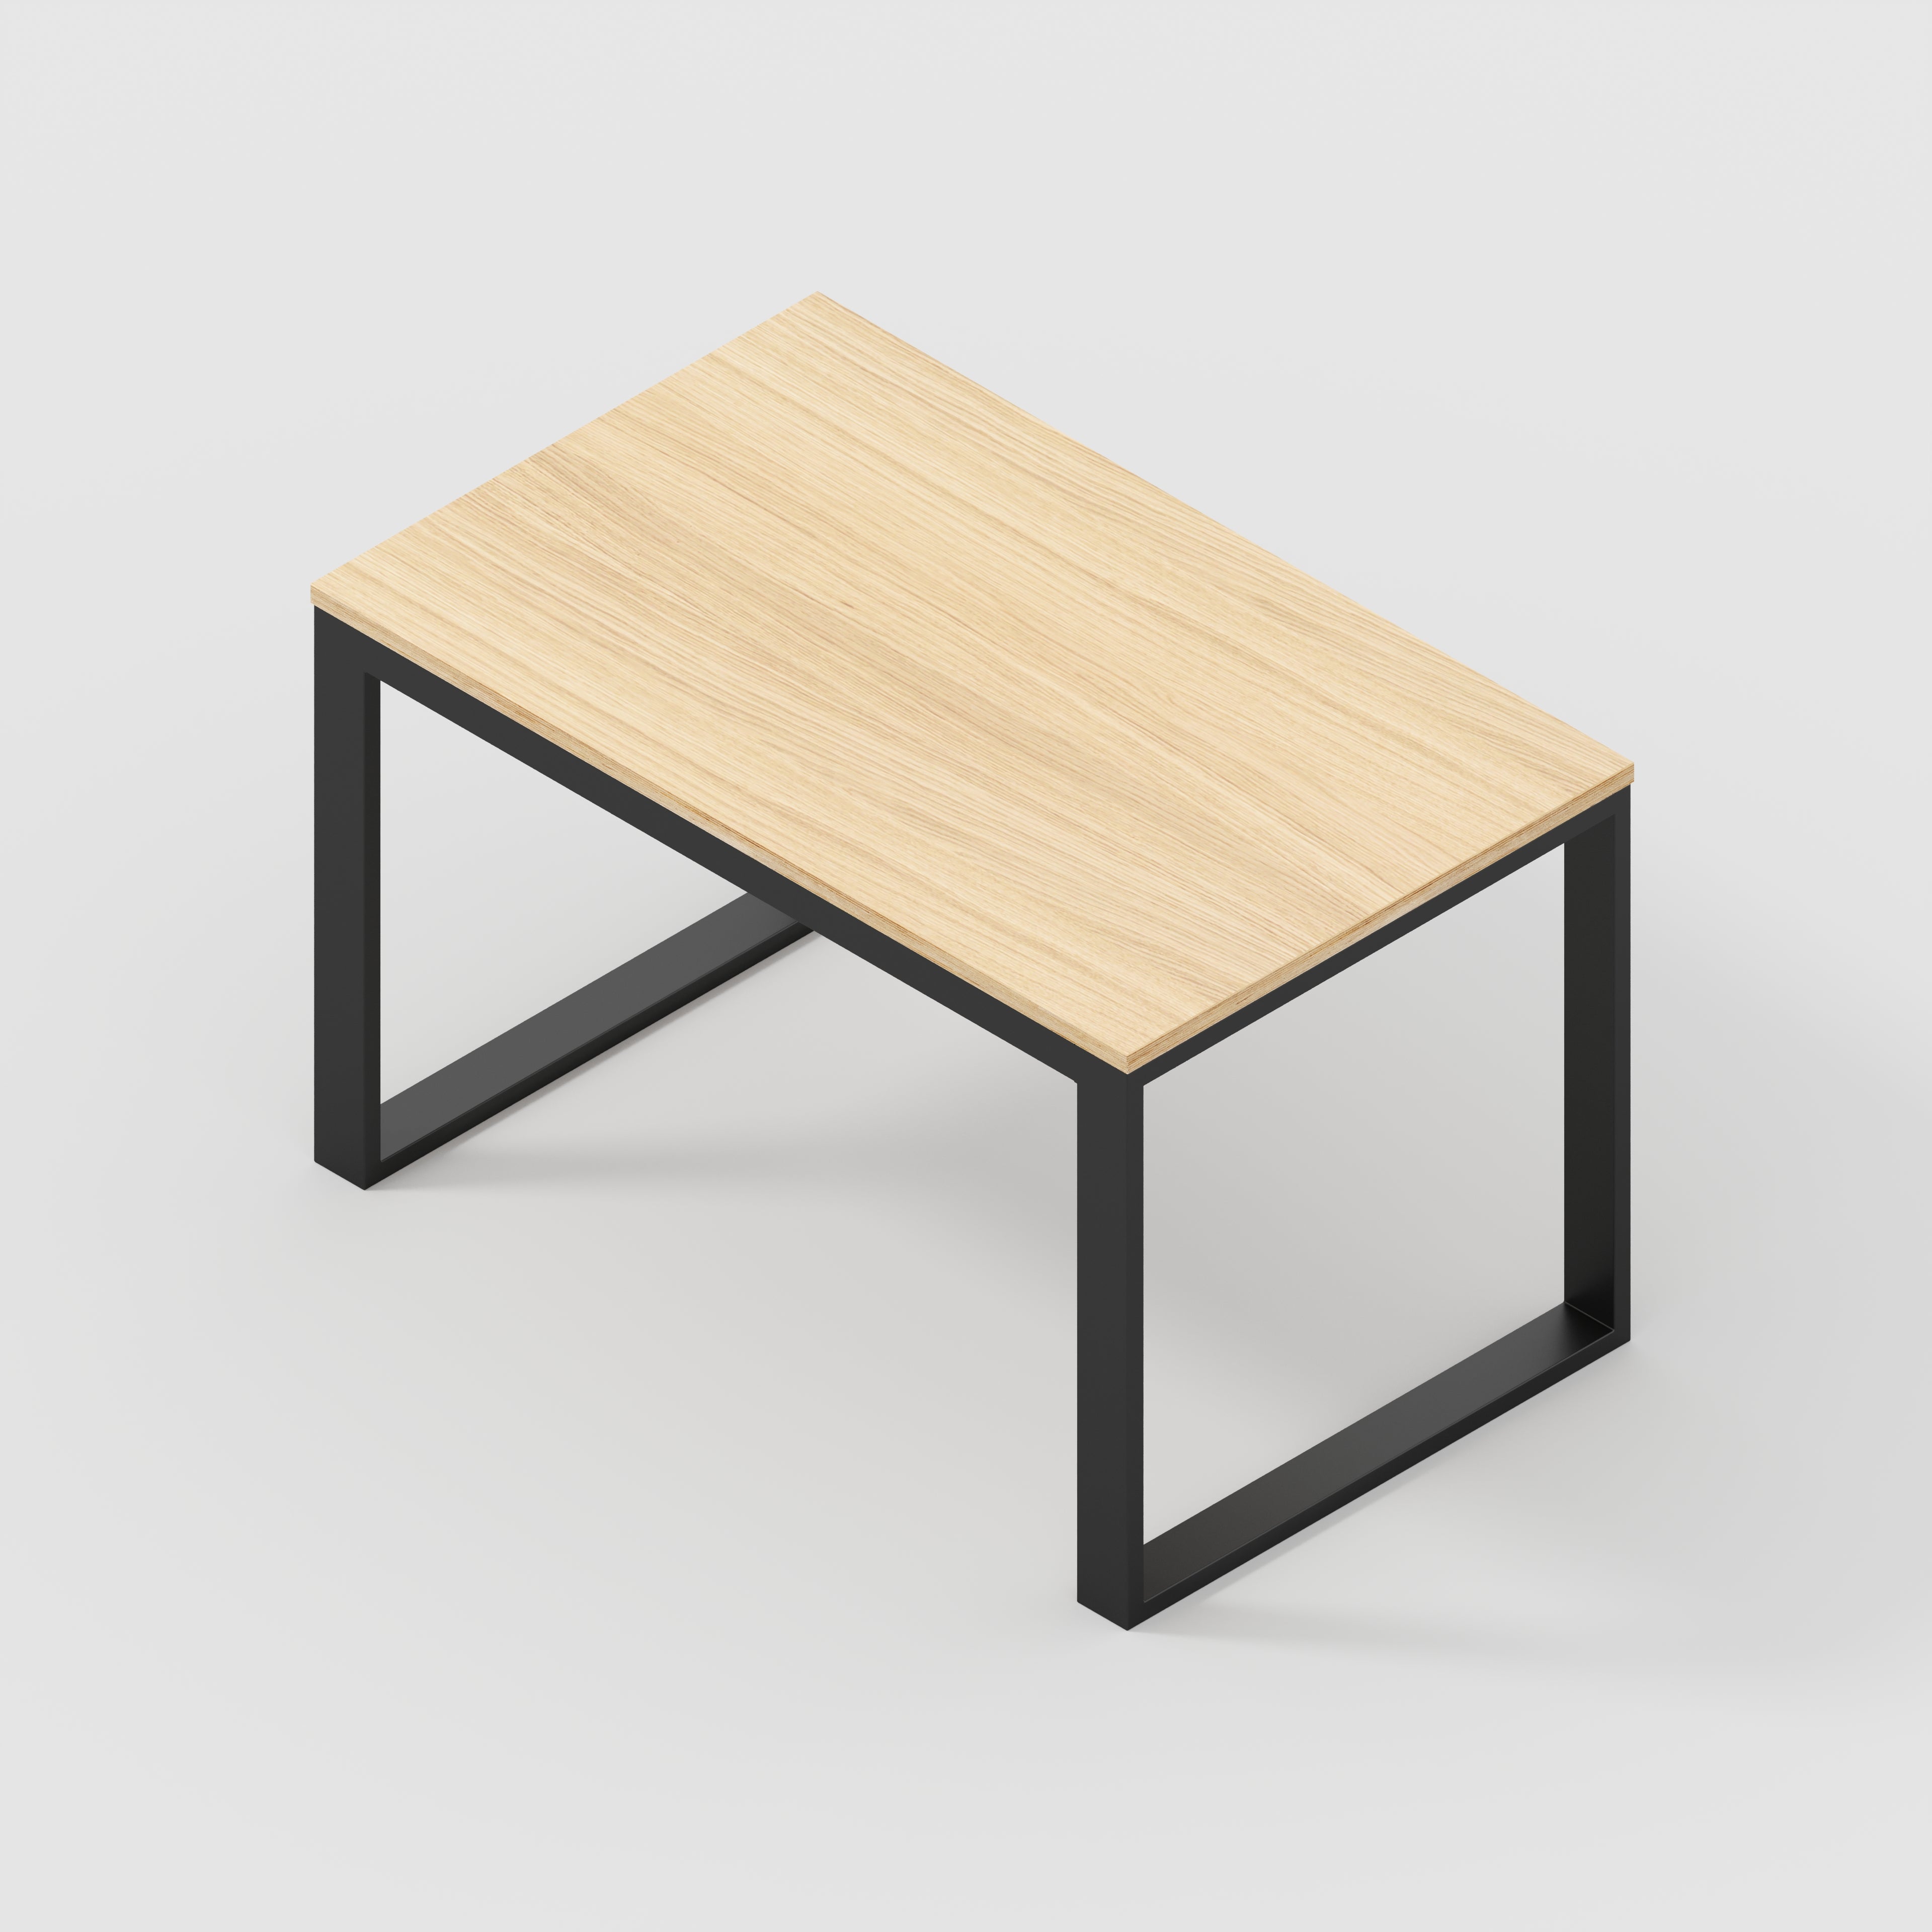 Table with Black Industrial Frame - Plywood Oak - 1200(w) x 745(d) x 735(h)